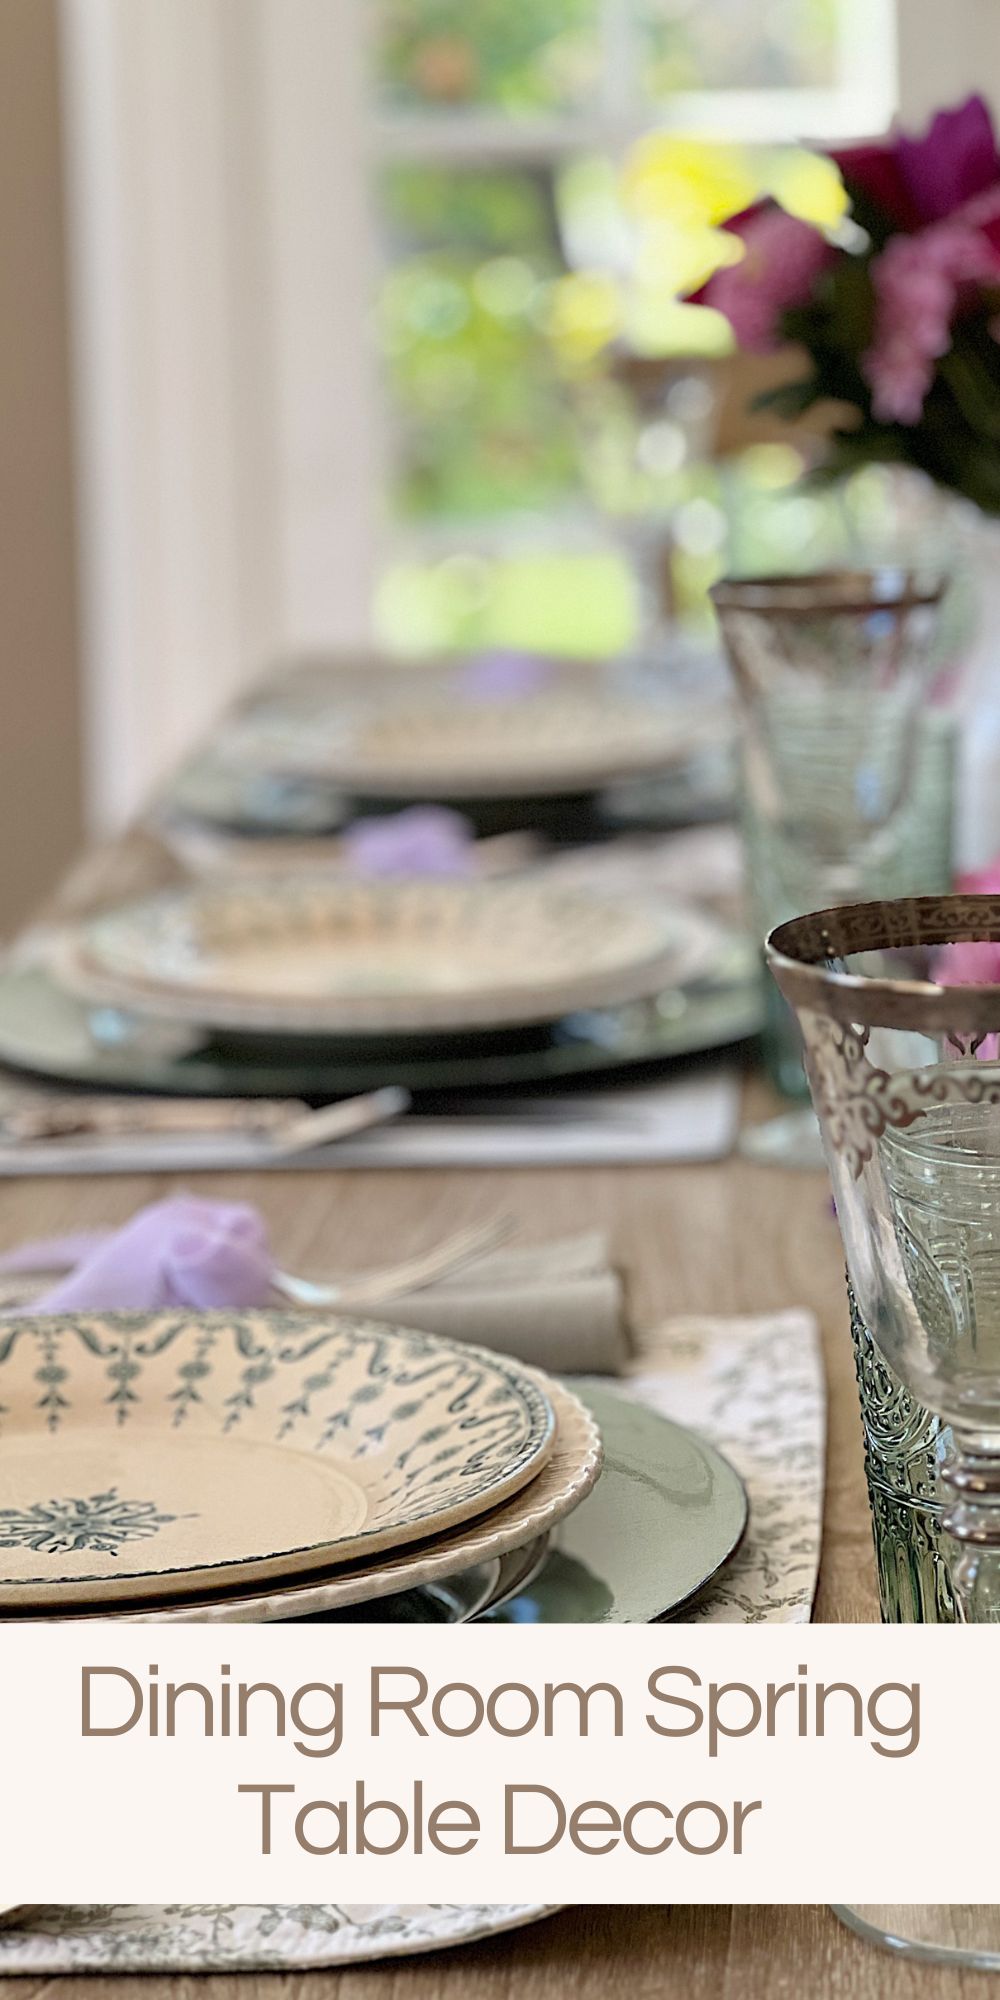 Spring arrived last week and now is the perfect time to freshen up your dining room decor with new colors and decorative items. 